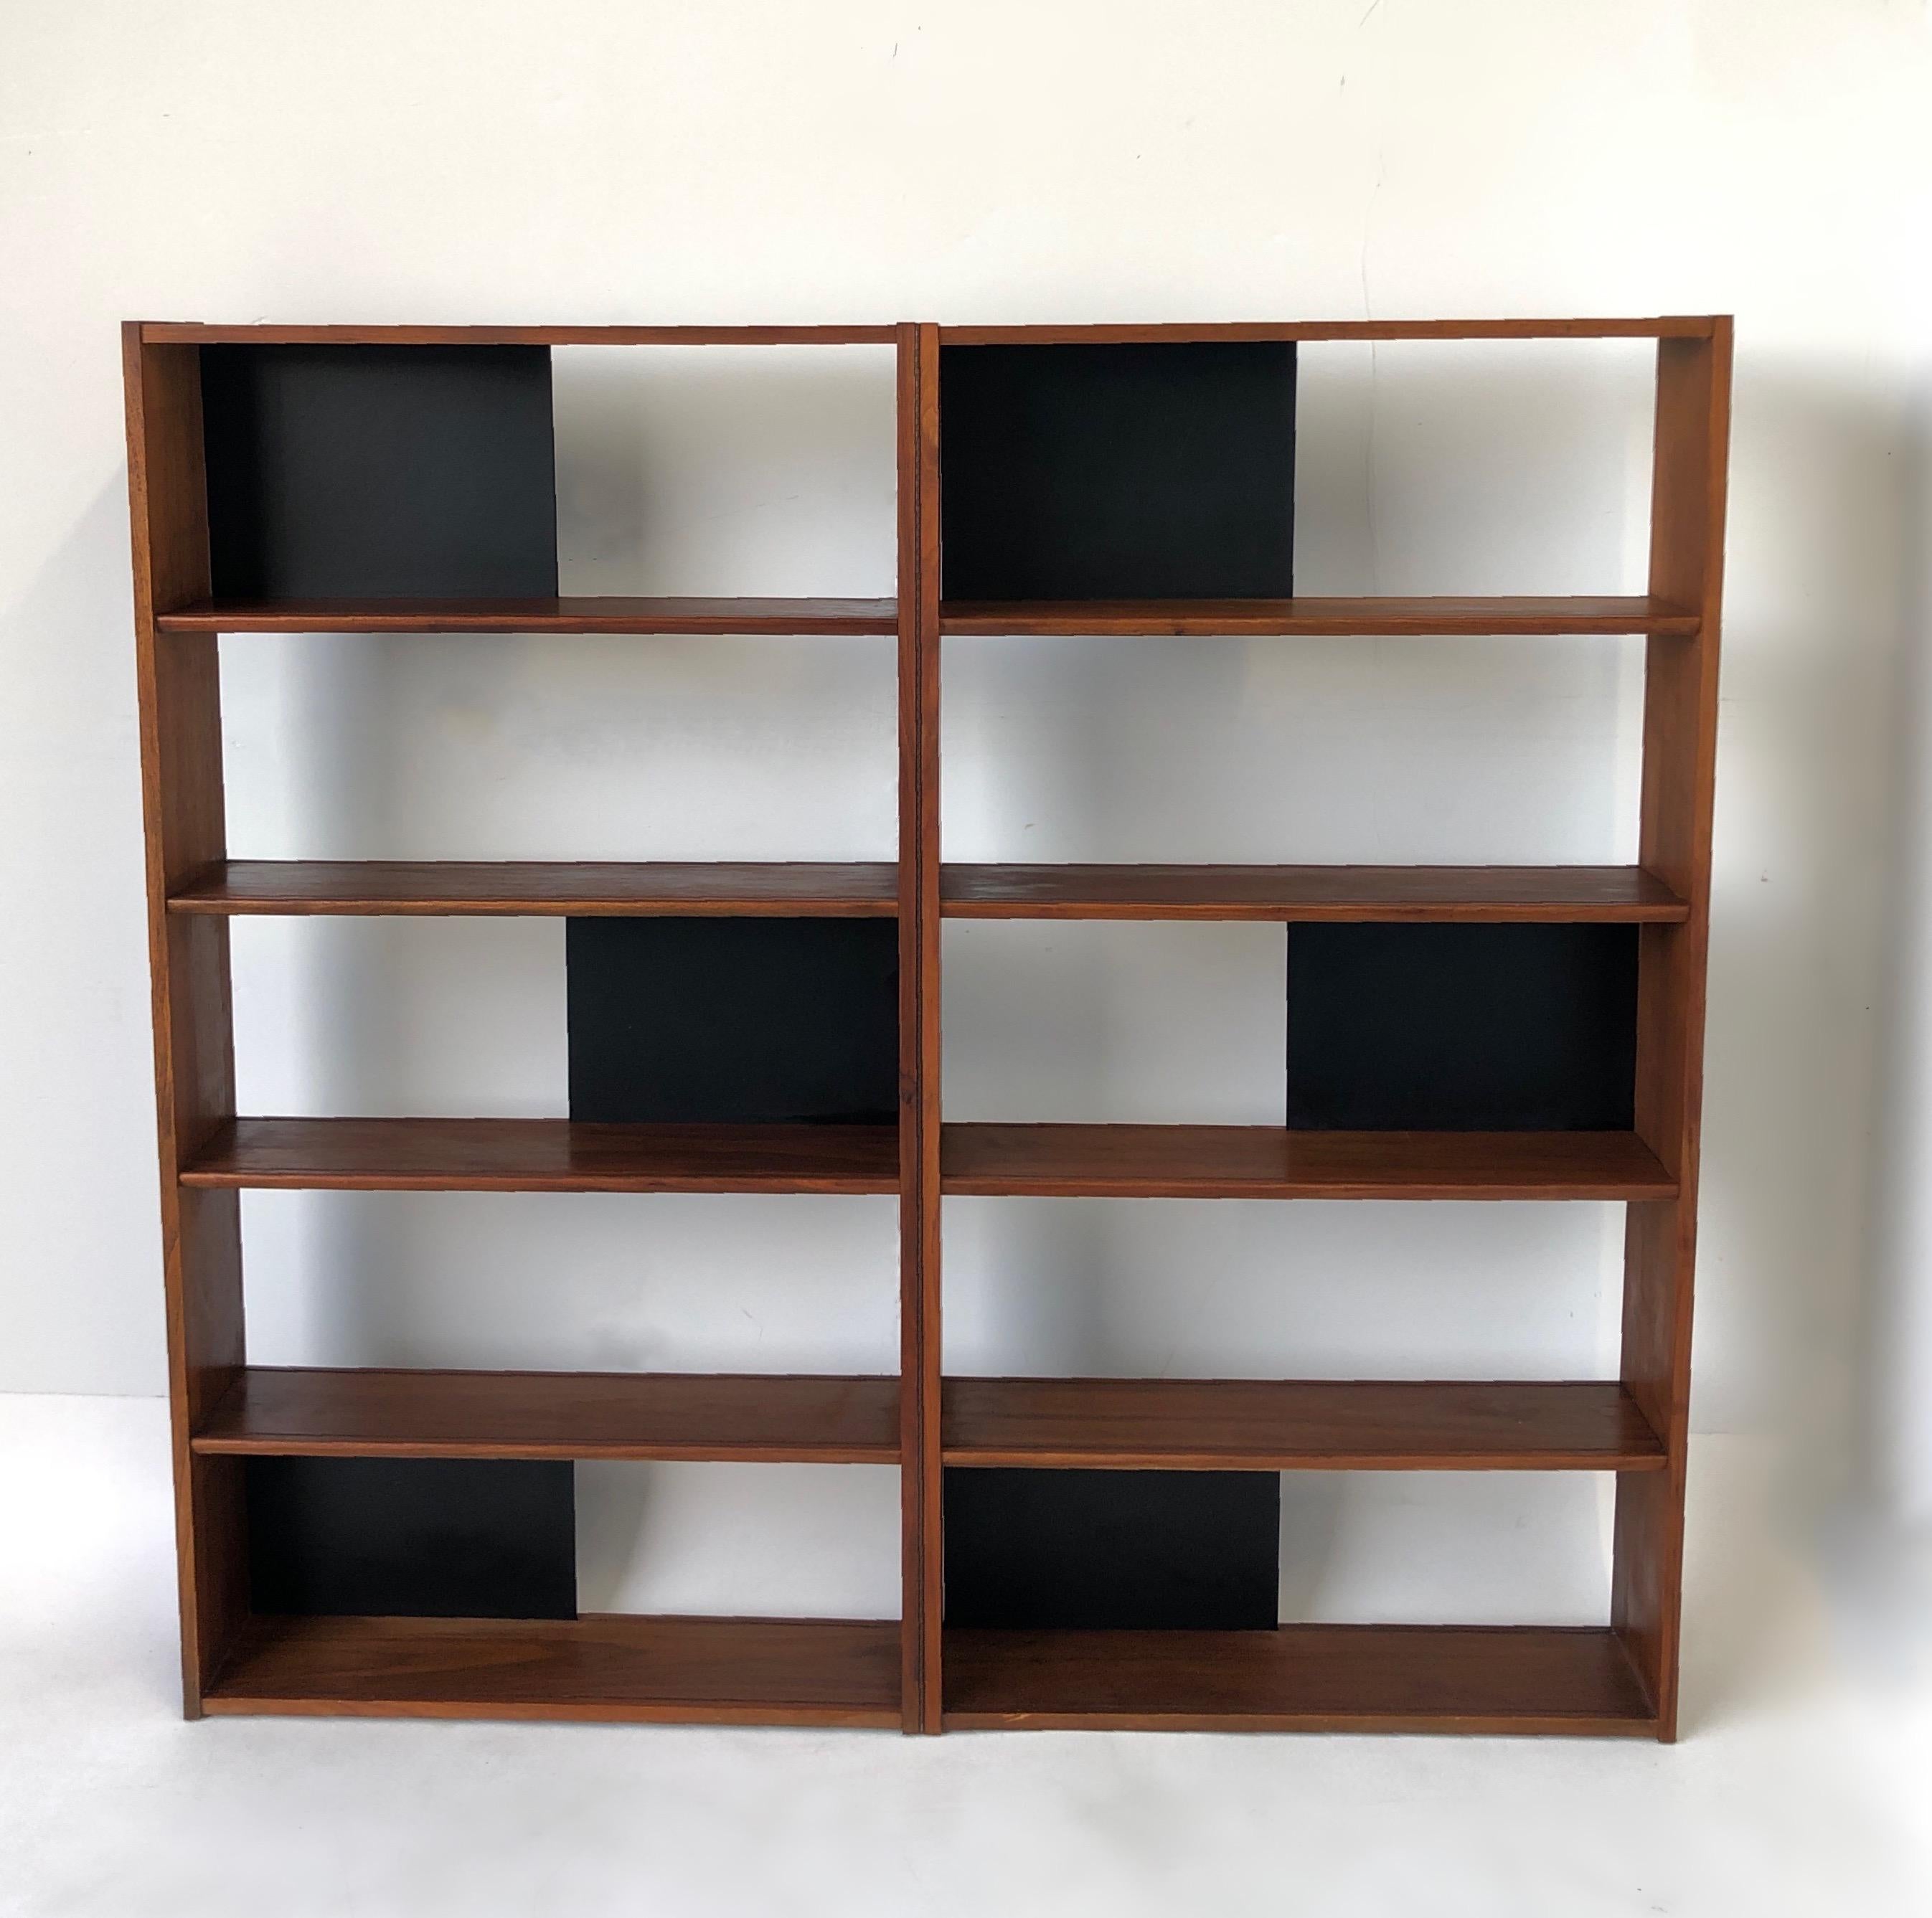 1950’s Walnut folding bookcase or room divider, designed by Evans Clark for Glenn of California. 
Constructed of walnut vernier and black lacquered sliding panels. It can be used open or closed. 
In original vintage condition, shows minor wear